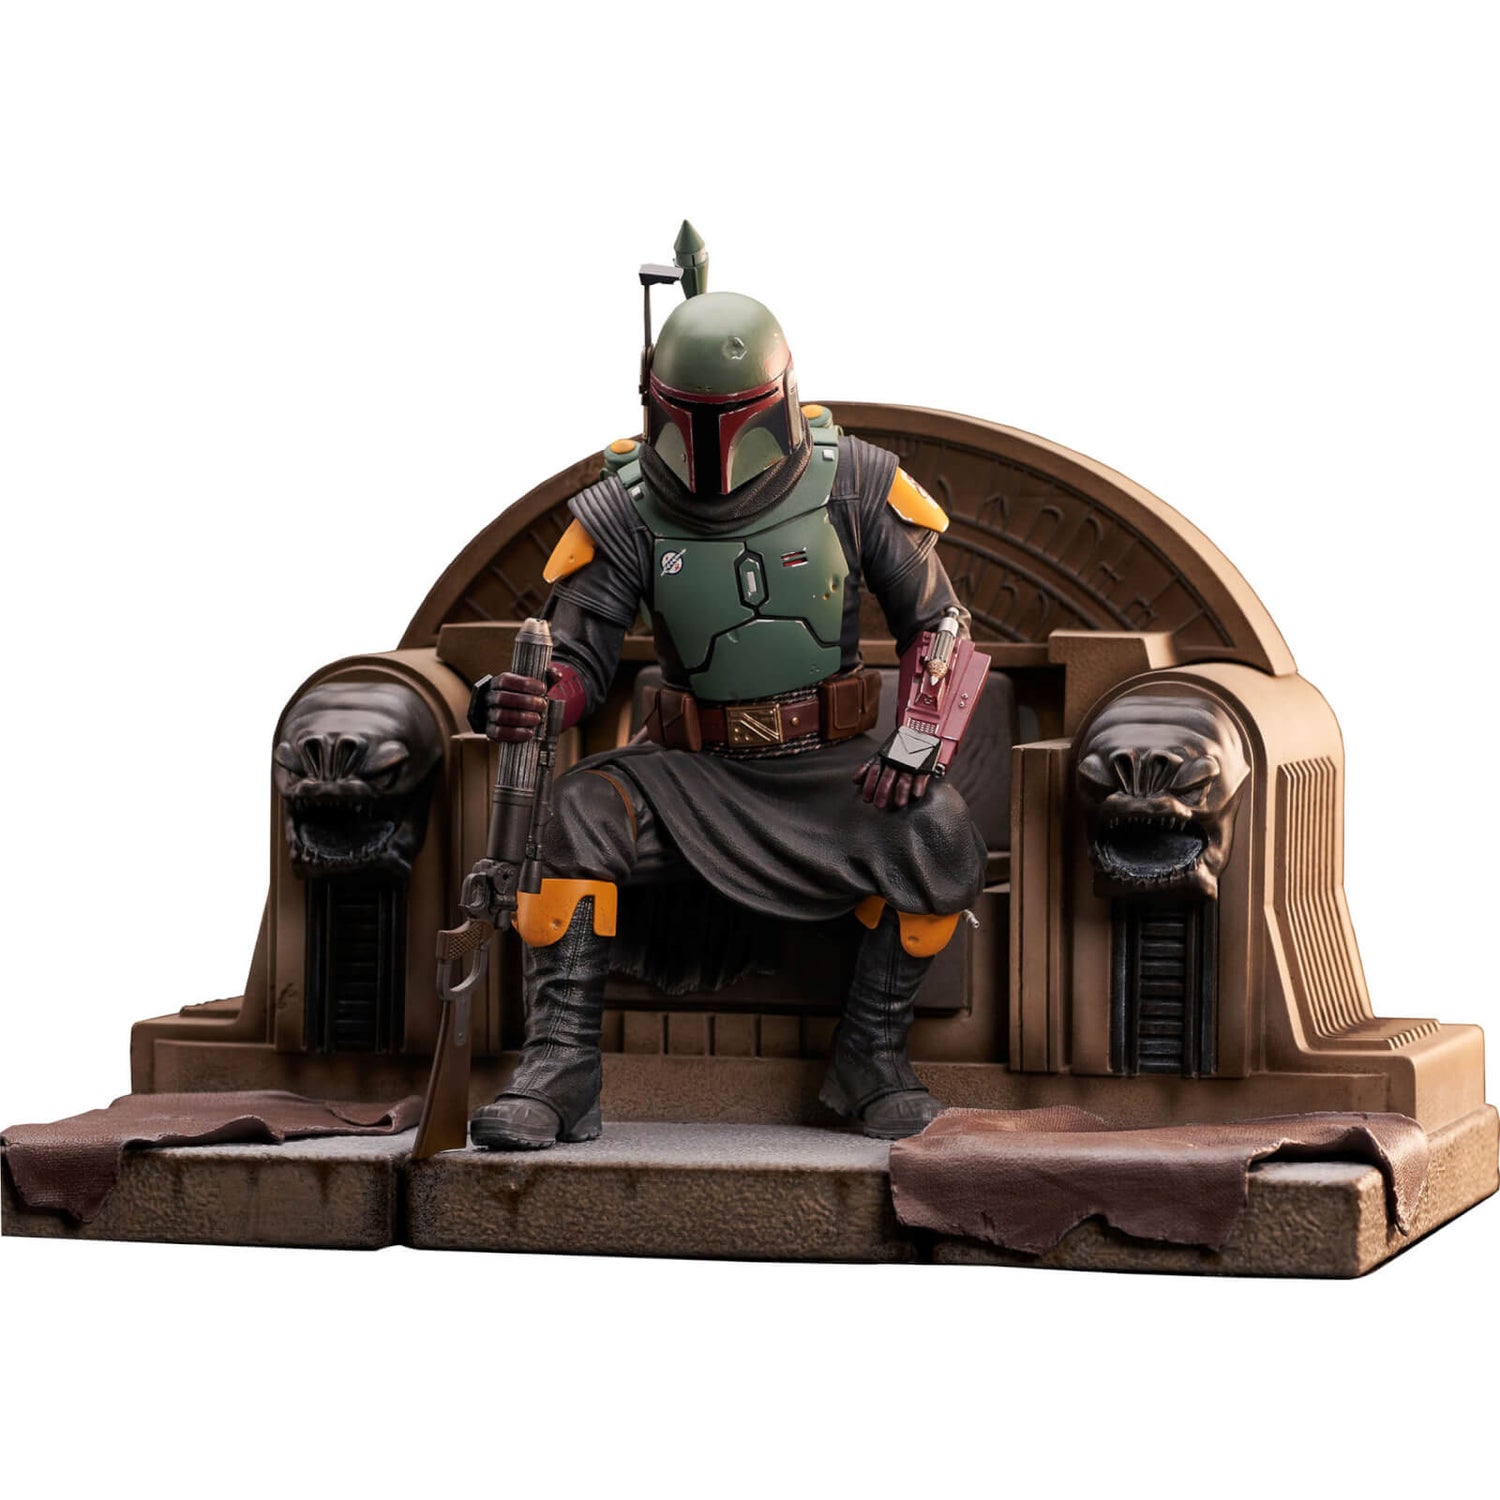 Gentle Giant The Mandalorian Premier Collection Statue - Boba Fett On Throne